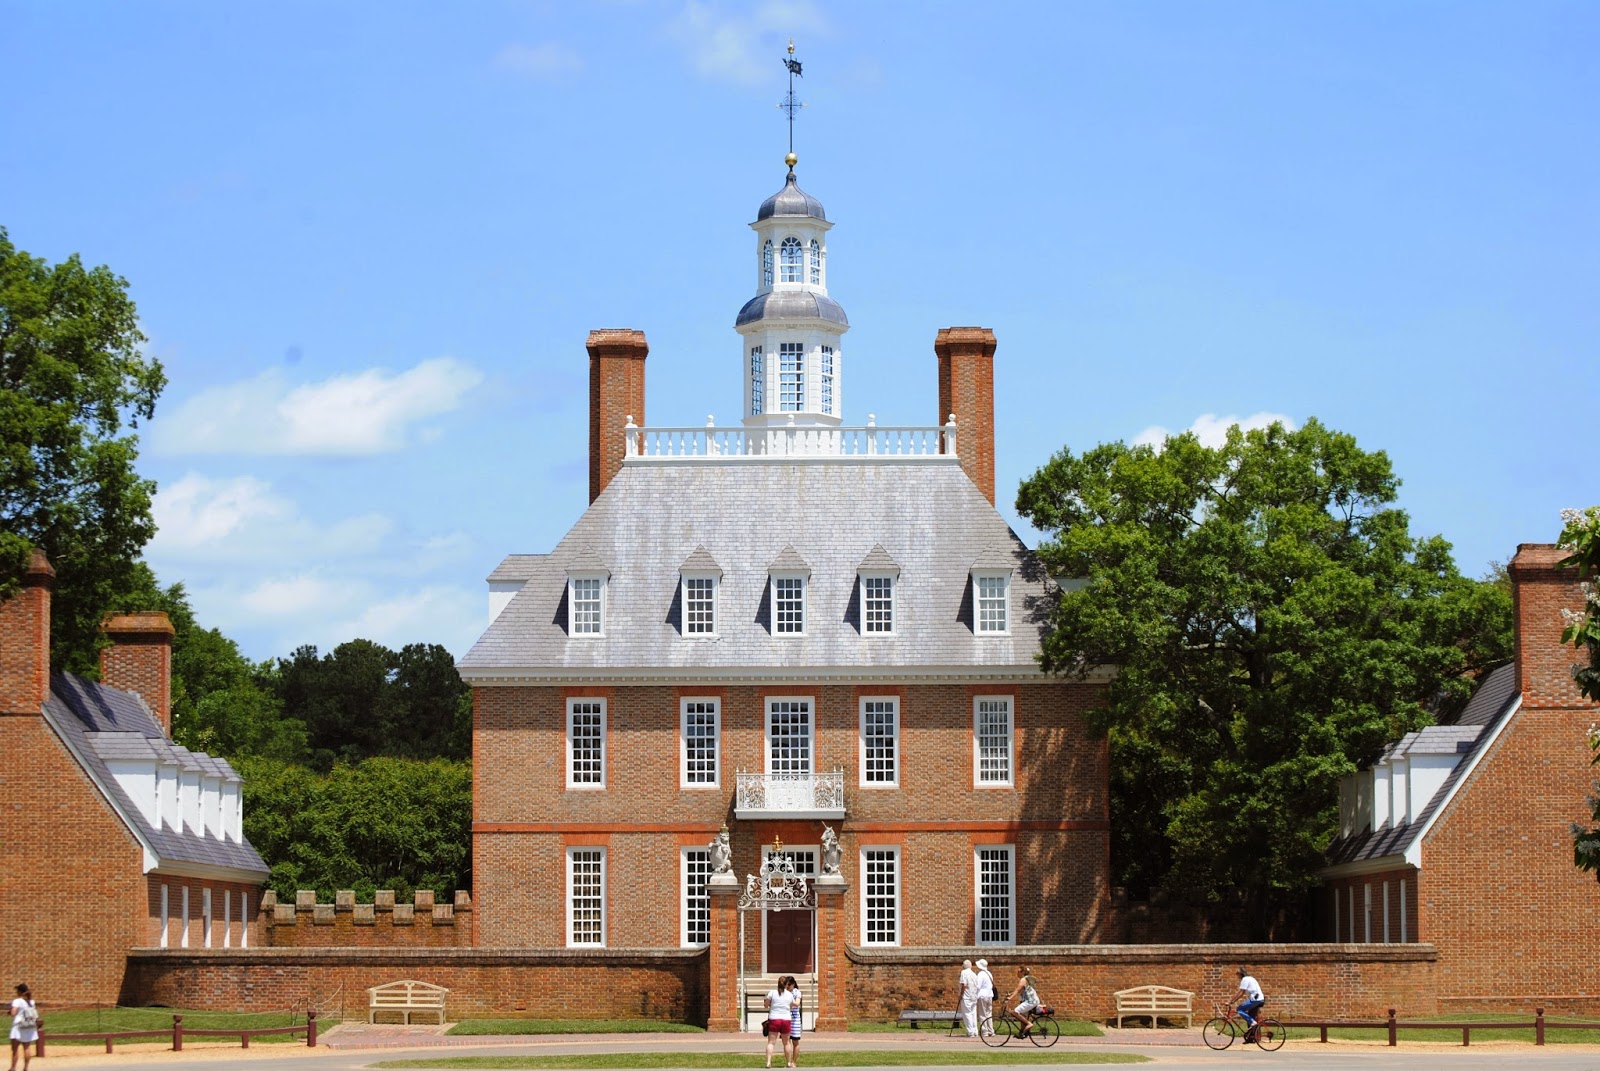 Our Adventures: Colonial Williamsburg, Jamestown Settlement, Historic